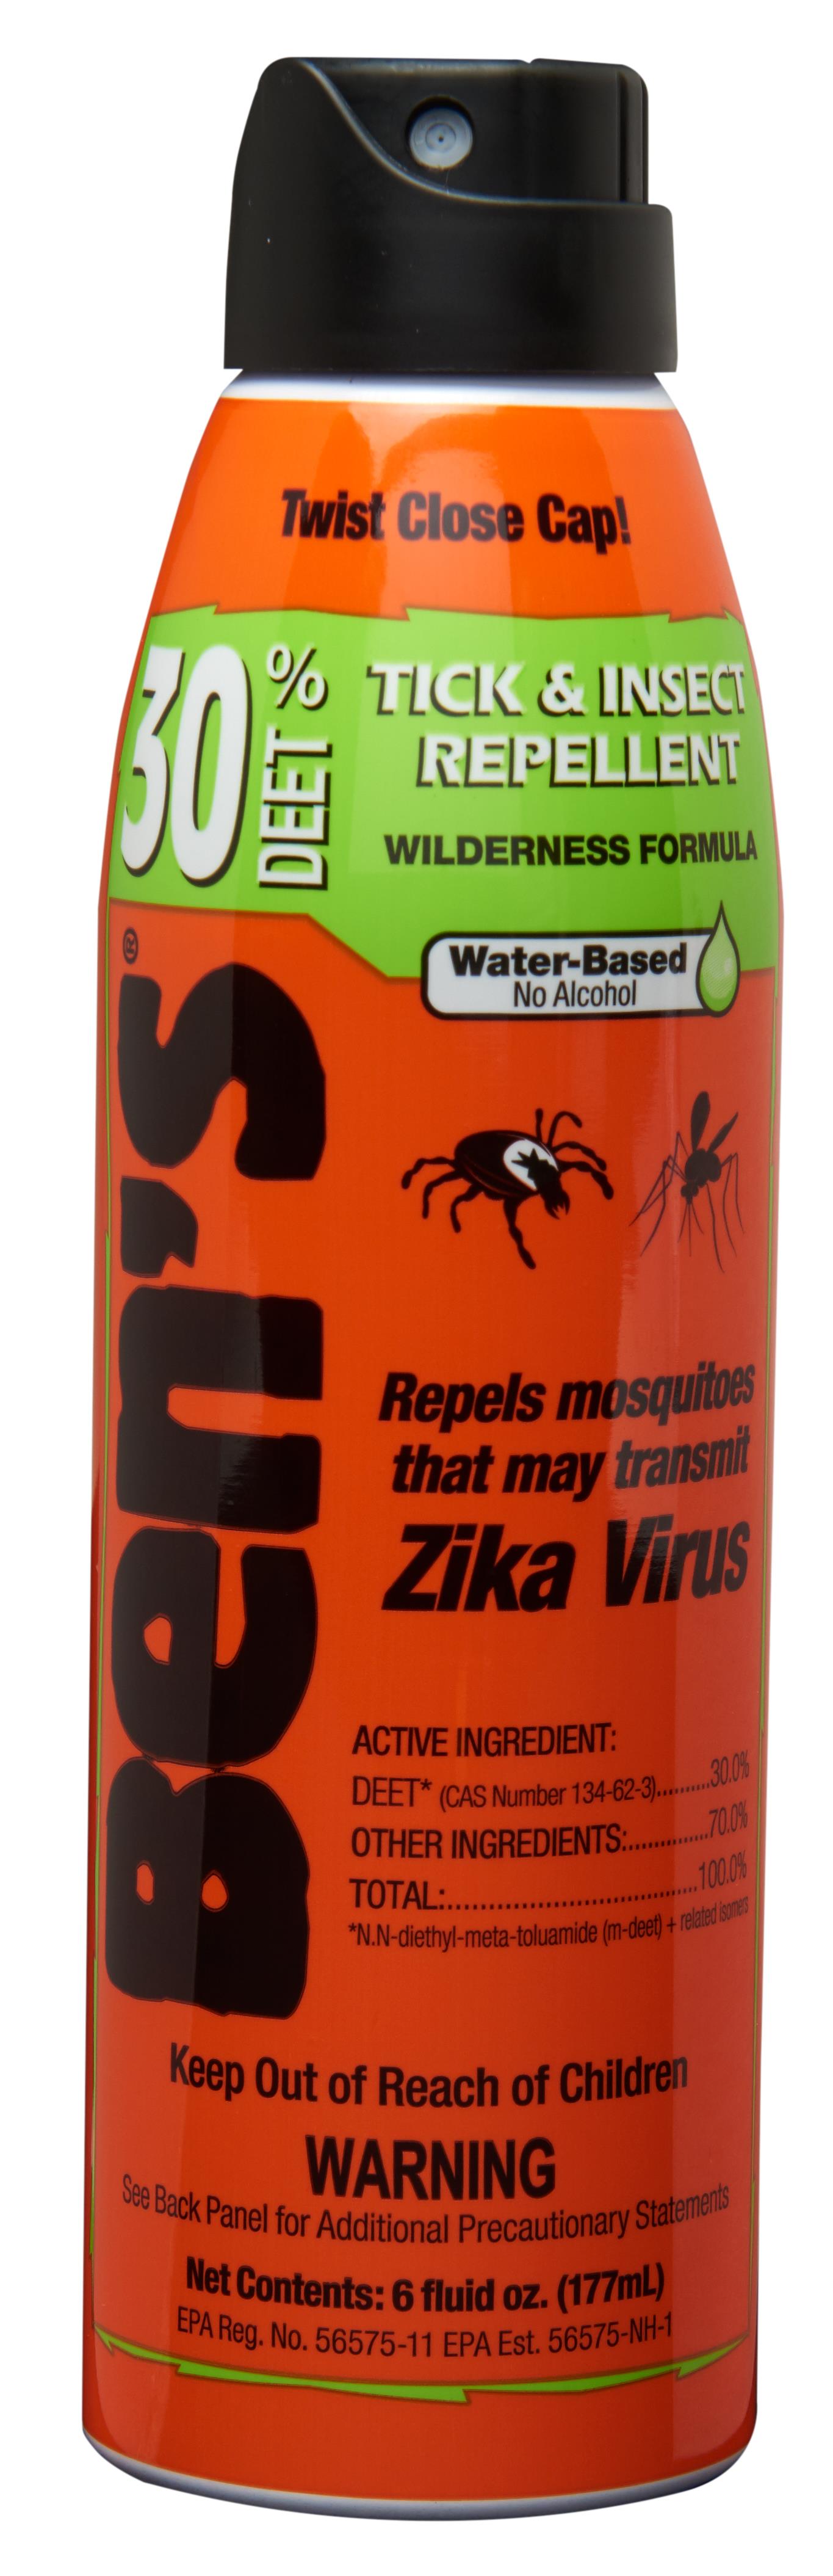 BENS 30 TICK & INSECT REPELLENT 6 OZ - Tagged Gloves